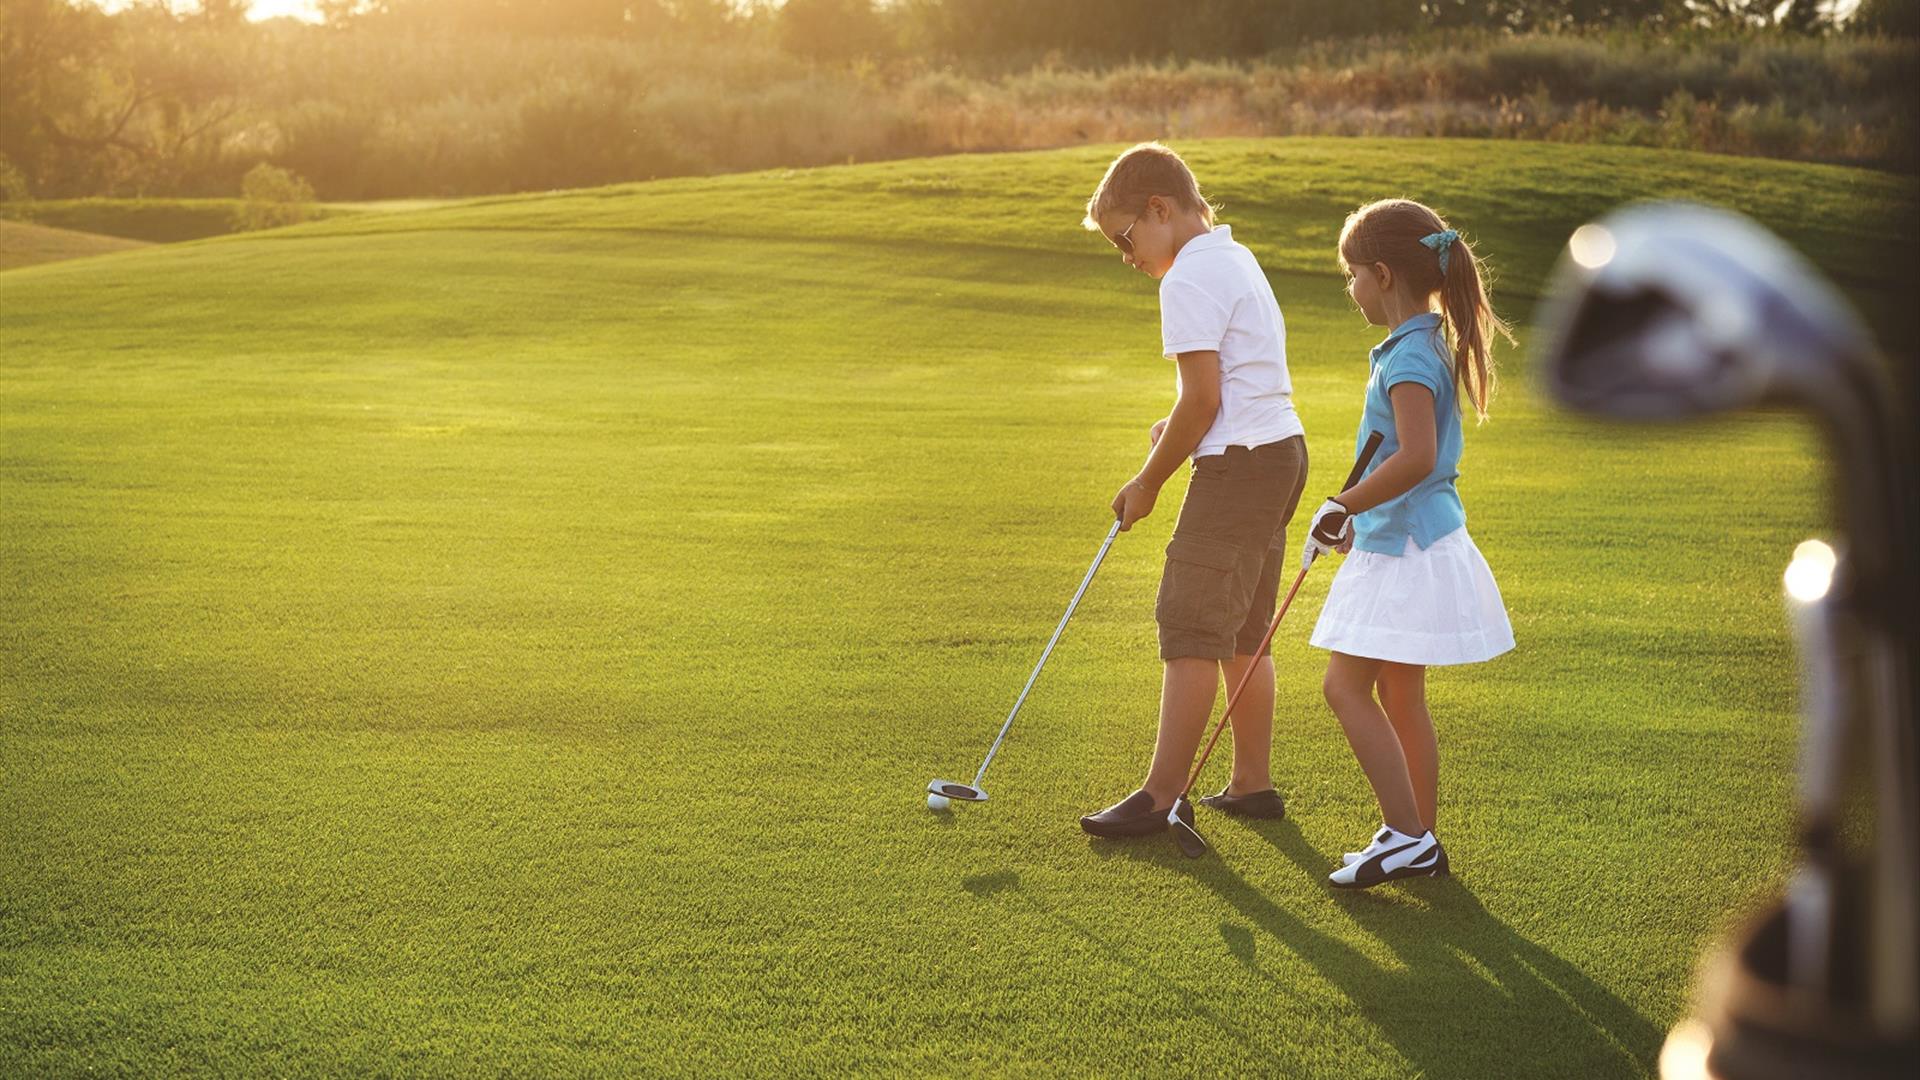 A young boy and girl playing golf on a golf course.